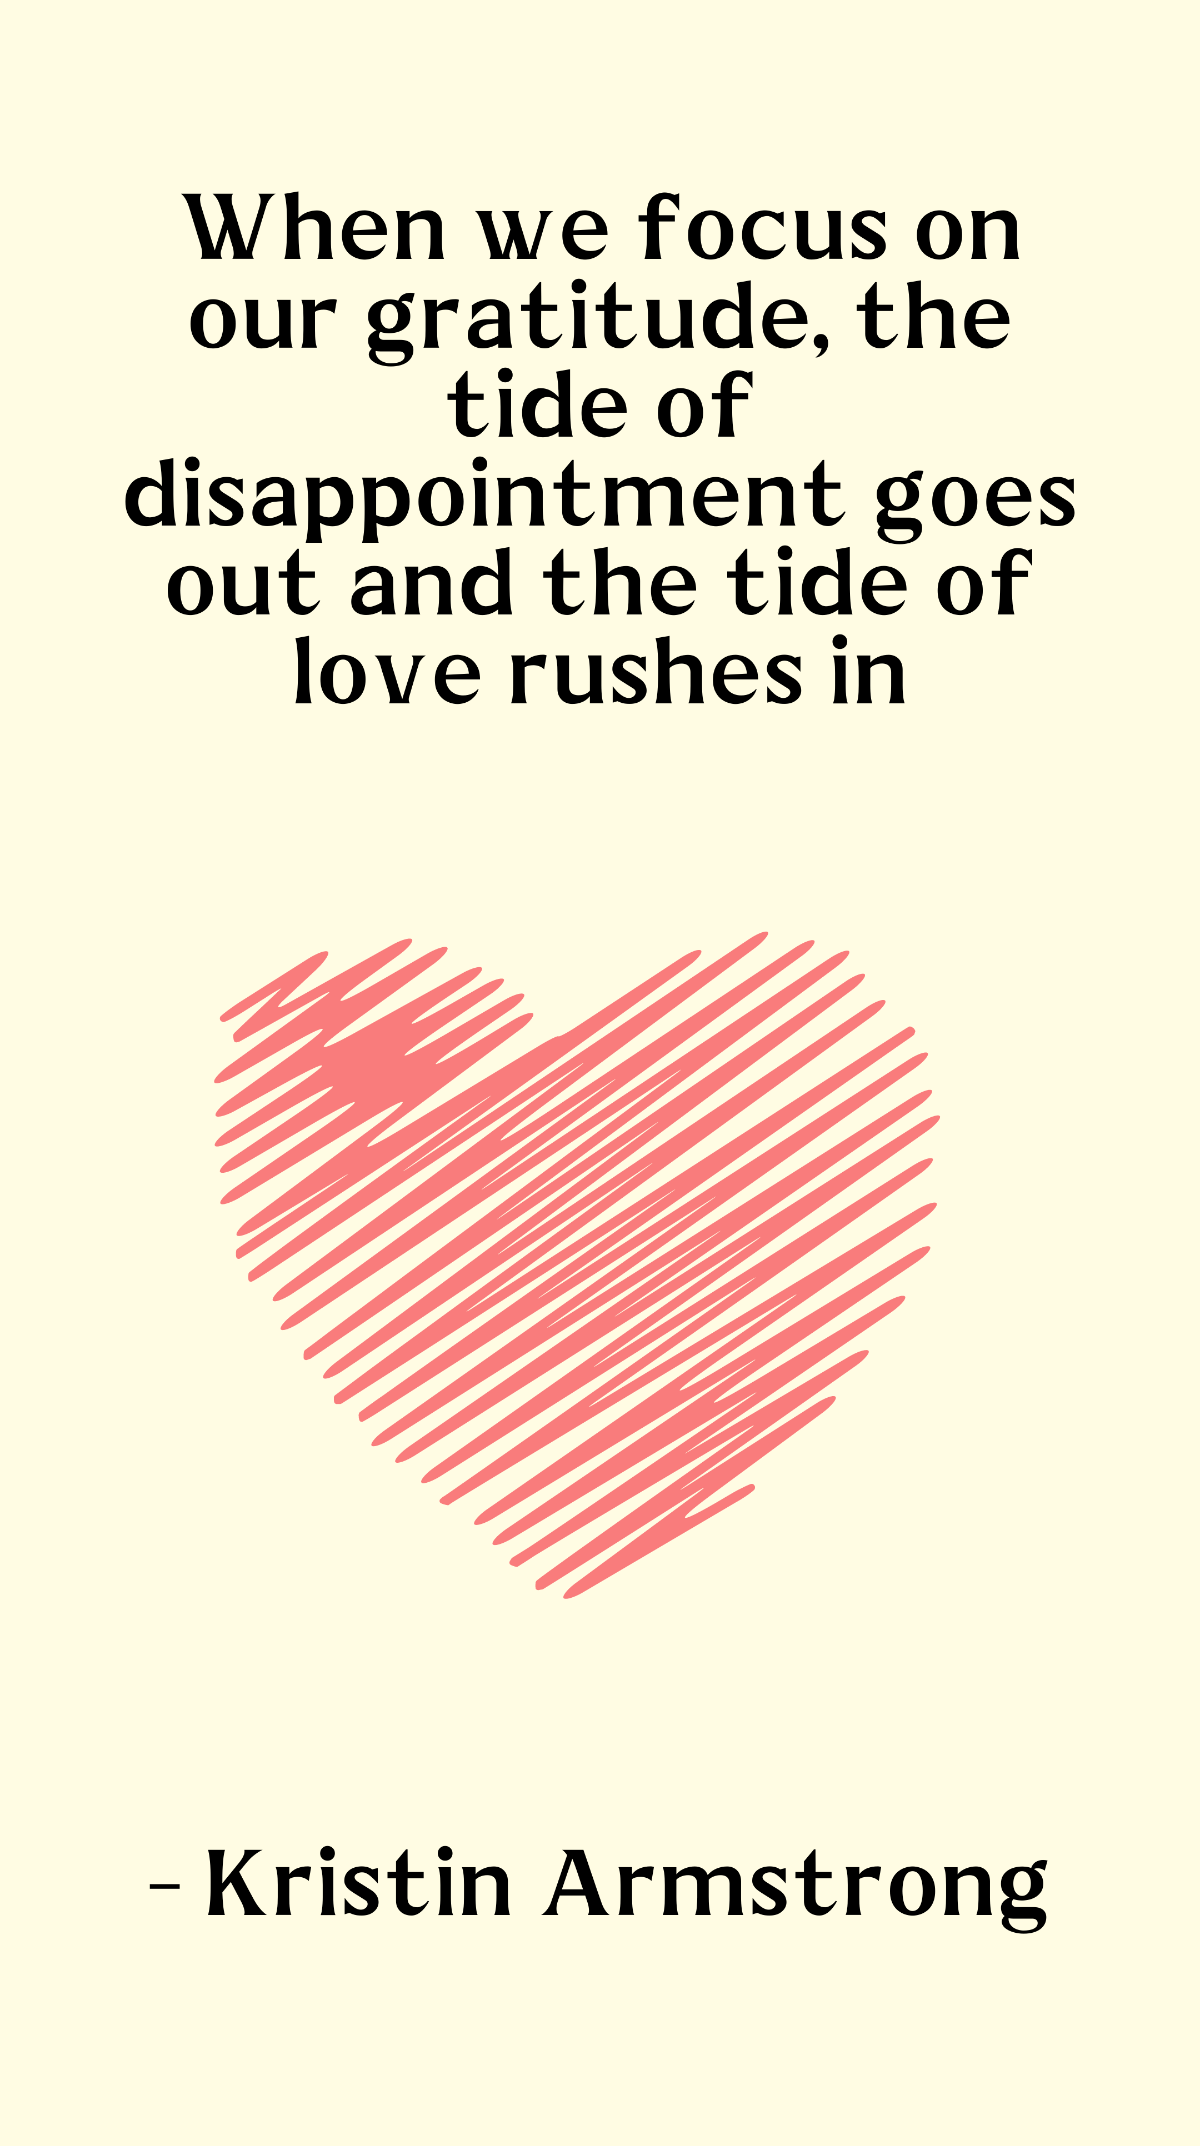 Kristin Armstrong - When we focus on our gratitude, the tide of disappointment goes out and the tide of love rushes in Template